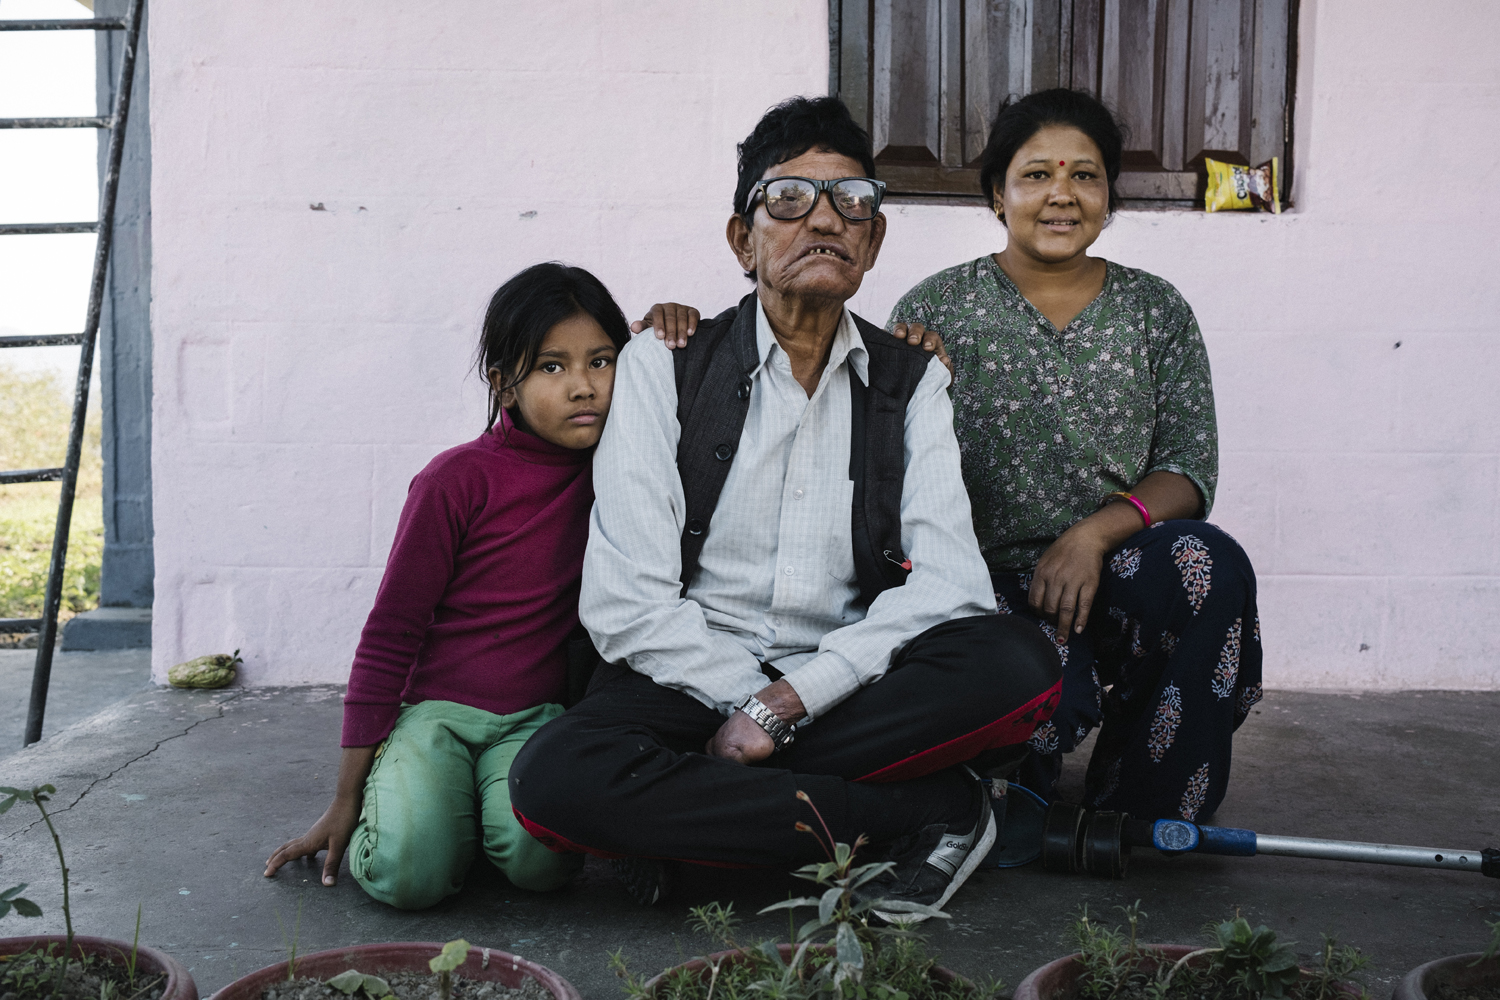 Dal Bahadur Pariyar (centre) who lives at the Lamatara Leprosy Settlement, south of Pokhara in Nepal. Dal is pictured with his daughter and granddaughter—Photograph by kind permission of Tom Bradley